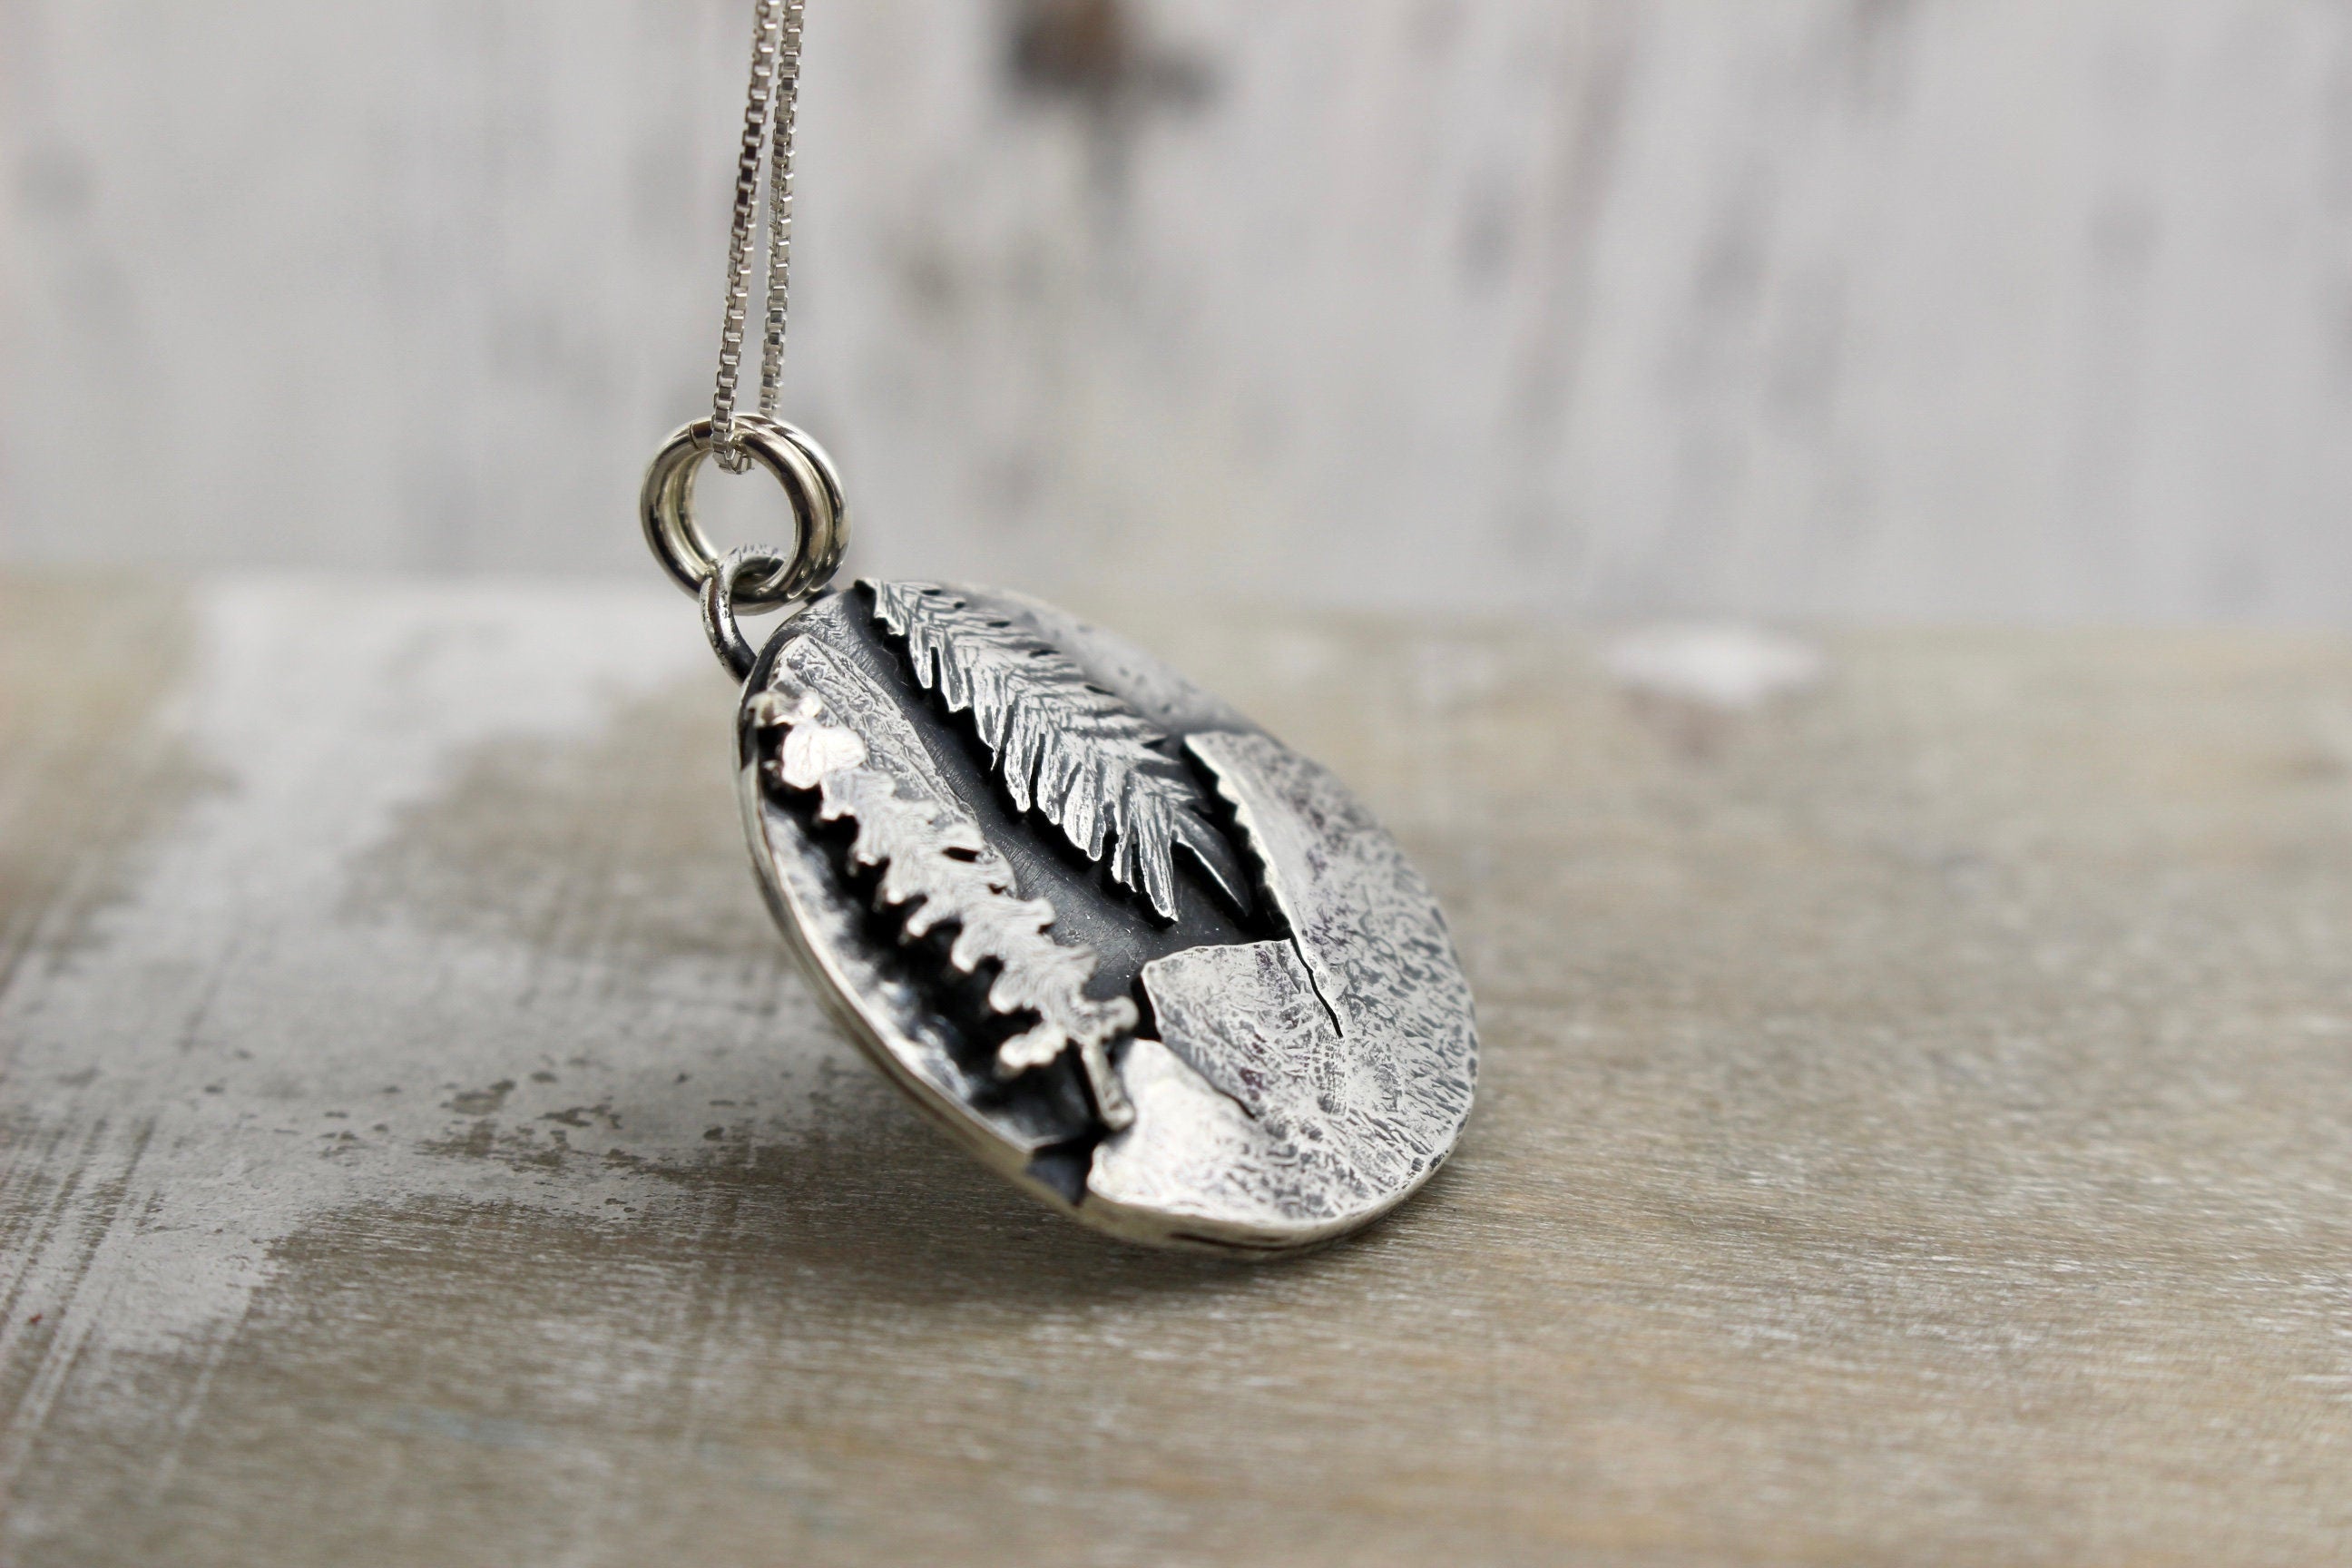 Sterling silver mountain scene necklace / Nature lover charm / charm necklace / gift for hiker